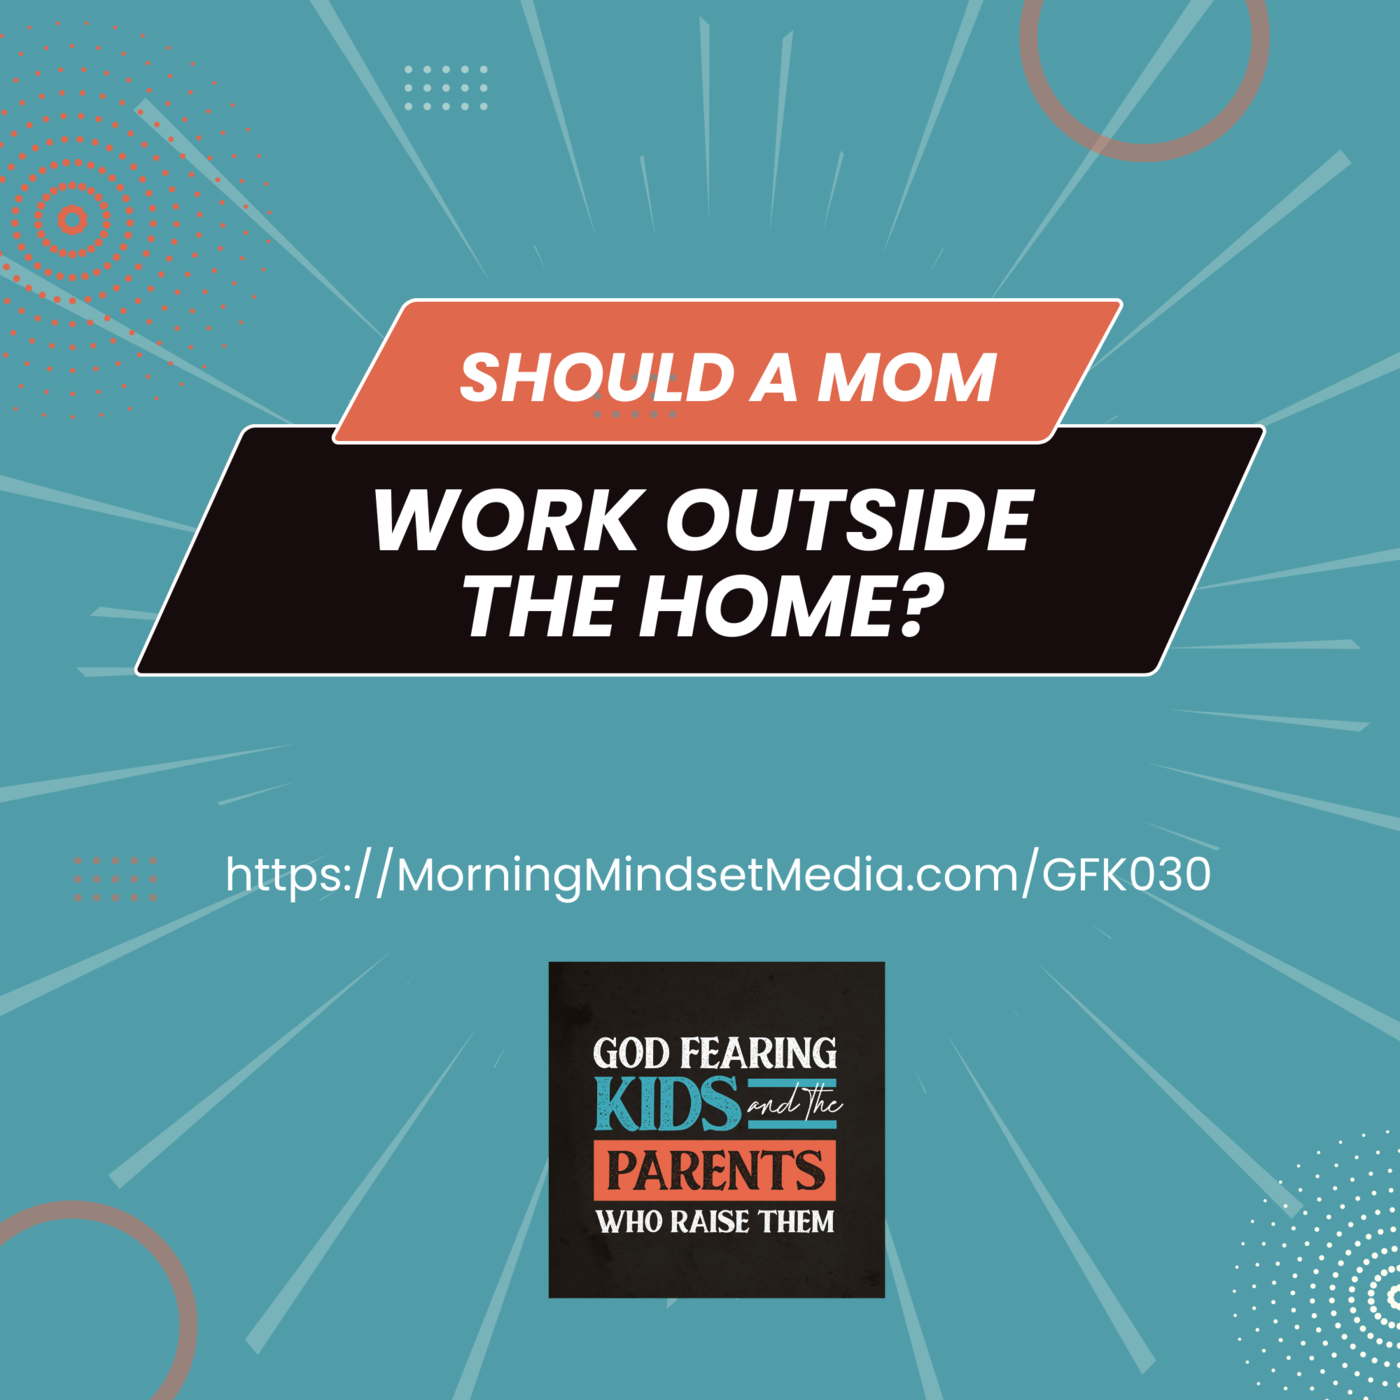 030: Should a Mom work outside the home?